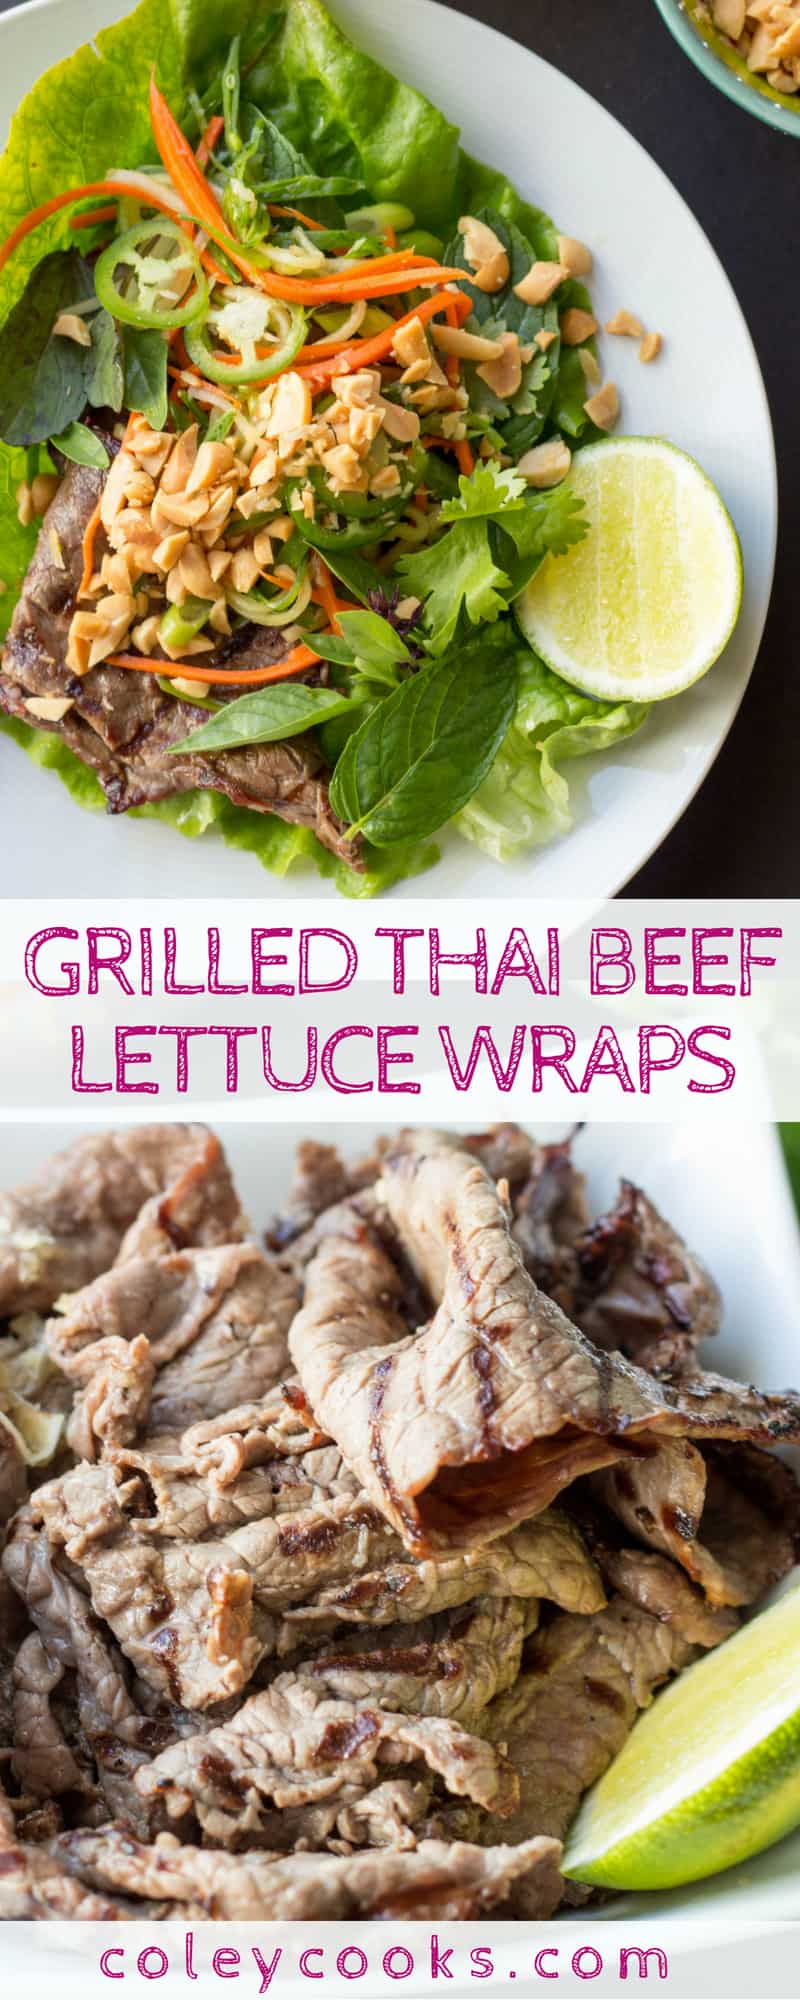 GRILLED THAI BEEF LETTUCE WRAPS | Easy, healthy grilled beef recipe! Flavorful marinated grilled beef with crunchy veggie slaw. #grilled #beef #paleo #recipe #summer #healthy #glutenfree | ColeyCooks.com